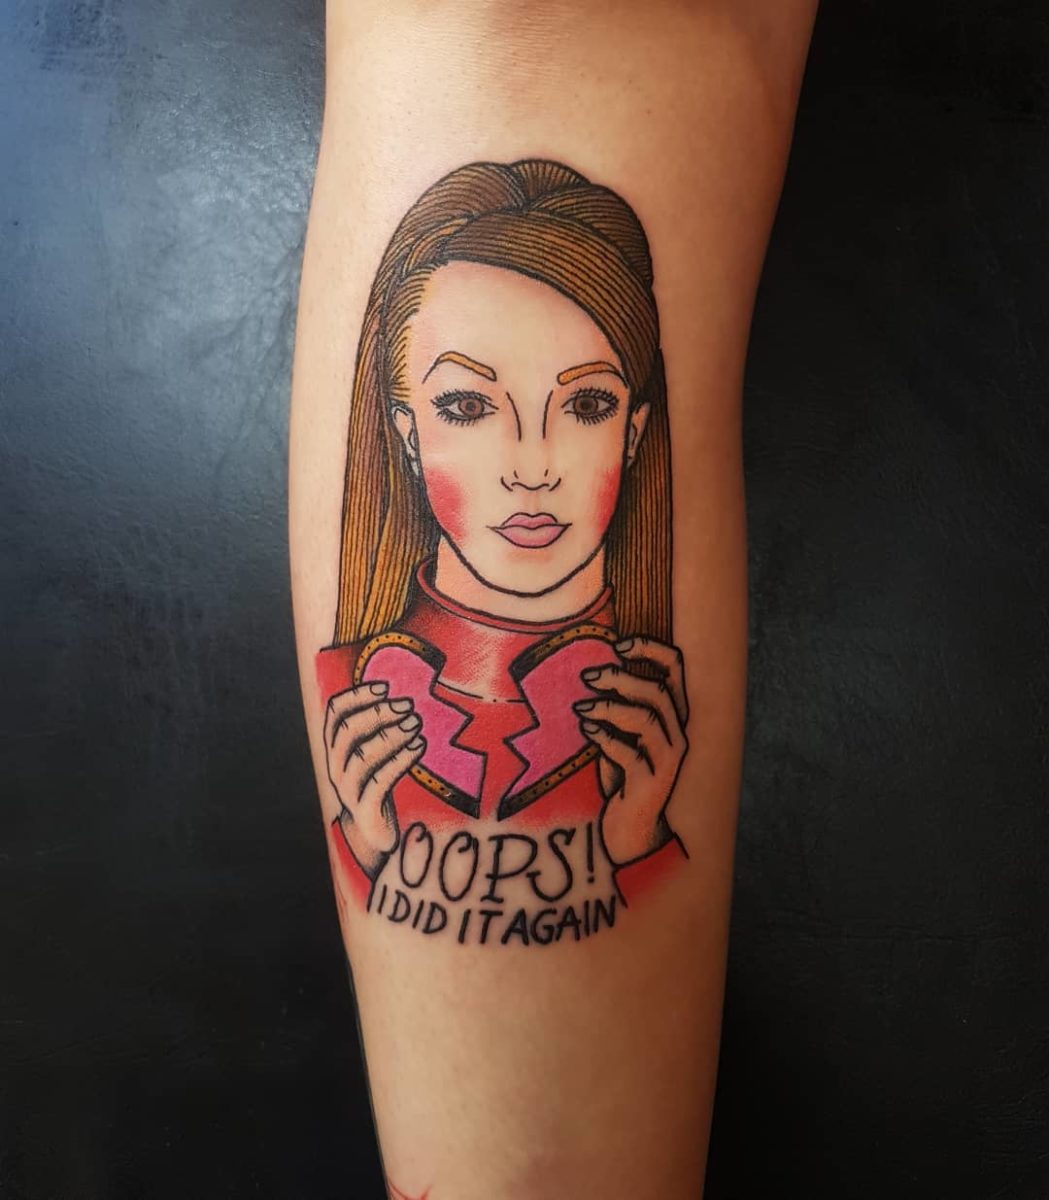 Britney Spears Just Got Three Post-Break-Up Tattoos: See Them and More Like Them | Breaking up is hard to do, but tattoos make it easier. See Britney Spears' new ink and other examples that are similar.